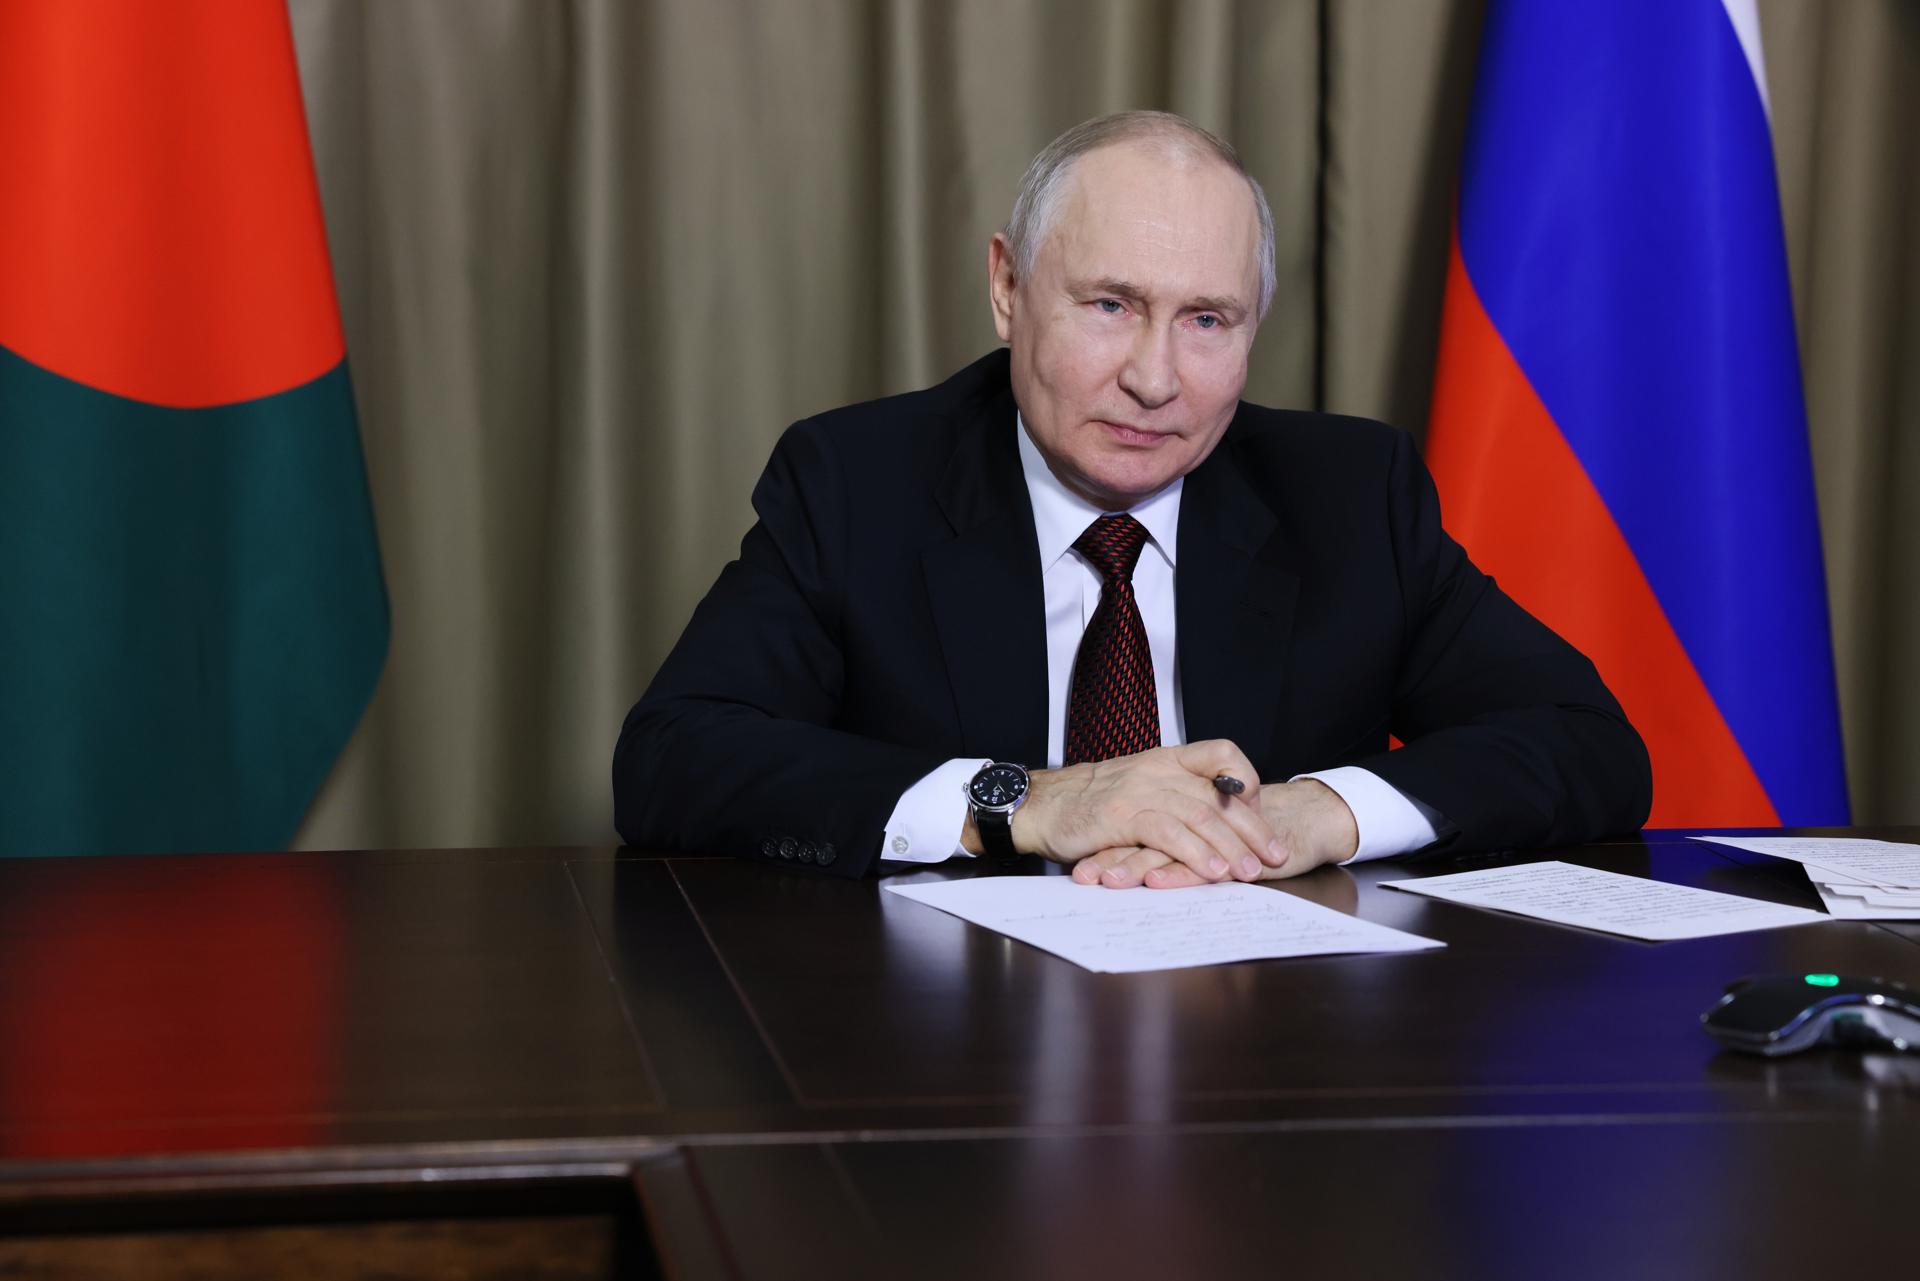 Russian President Vladimir Putin takes part in a ceremony marking the delivery of Russian nuclear fuel to the first power unit of the Rooppur NPP in Bangladesh, via videoconference call, in Sochi, Krasnodar region, Russia, 05 October 2023. EFE-EPA/MIKHAIL METZEL/SPUTNIK/KREMLIN / POOL MANDATORY CREDIT